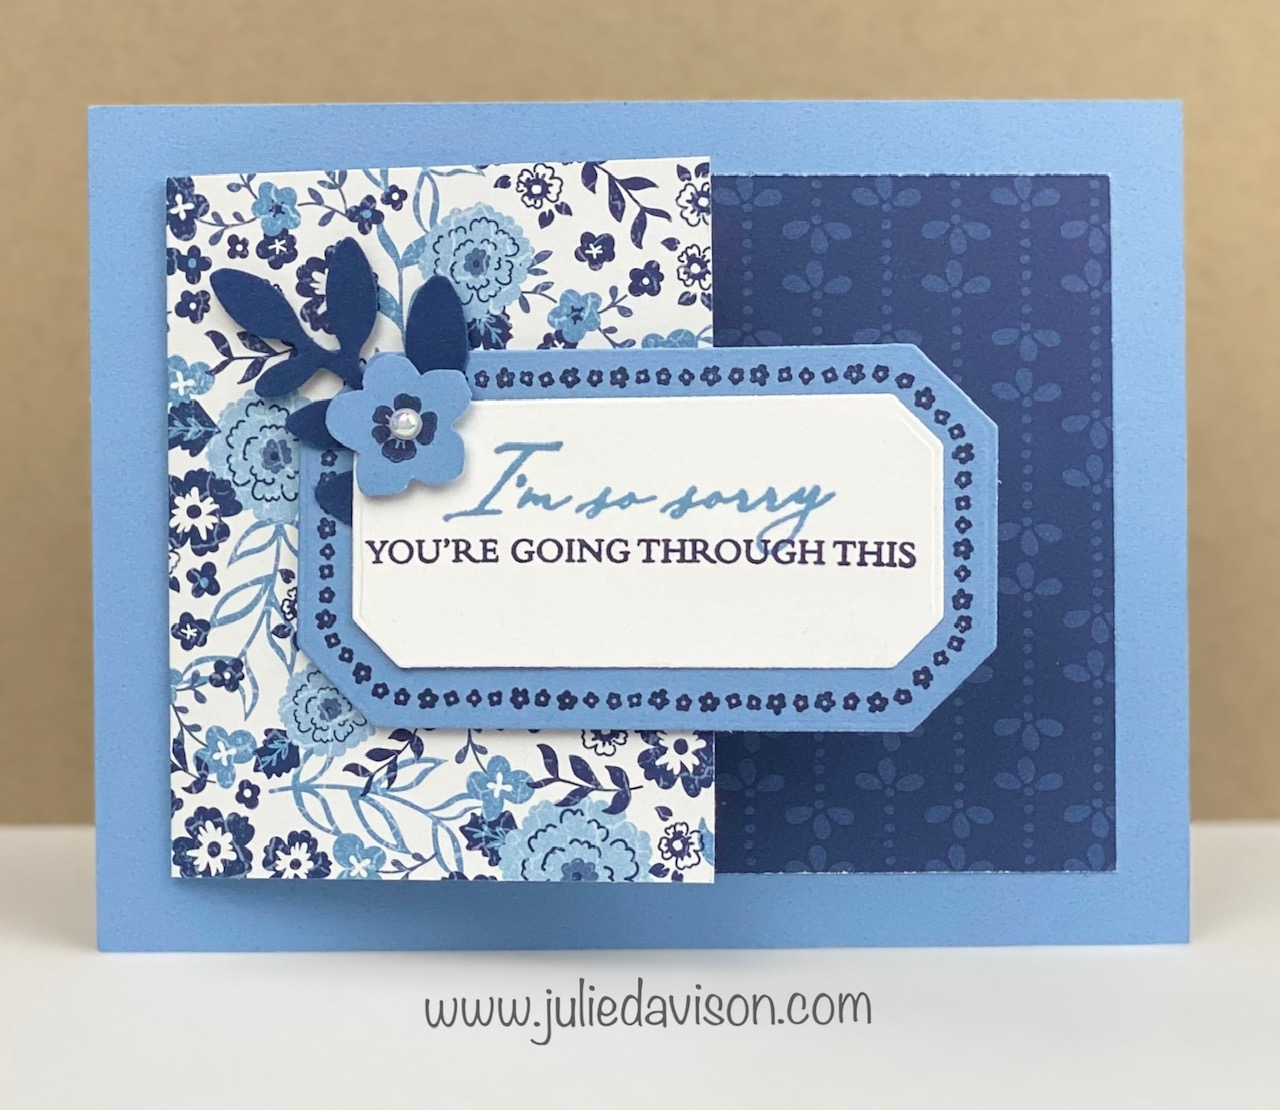 Julie's Stamping Spot -- Stampin' Up! Project Ideas by Julie